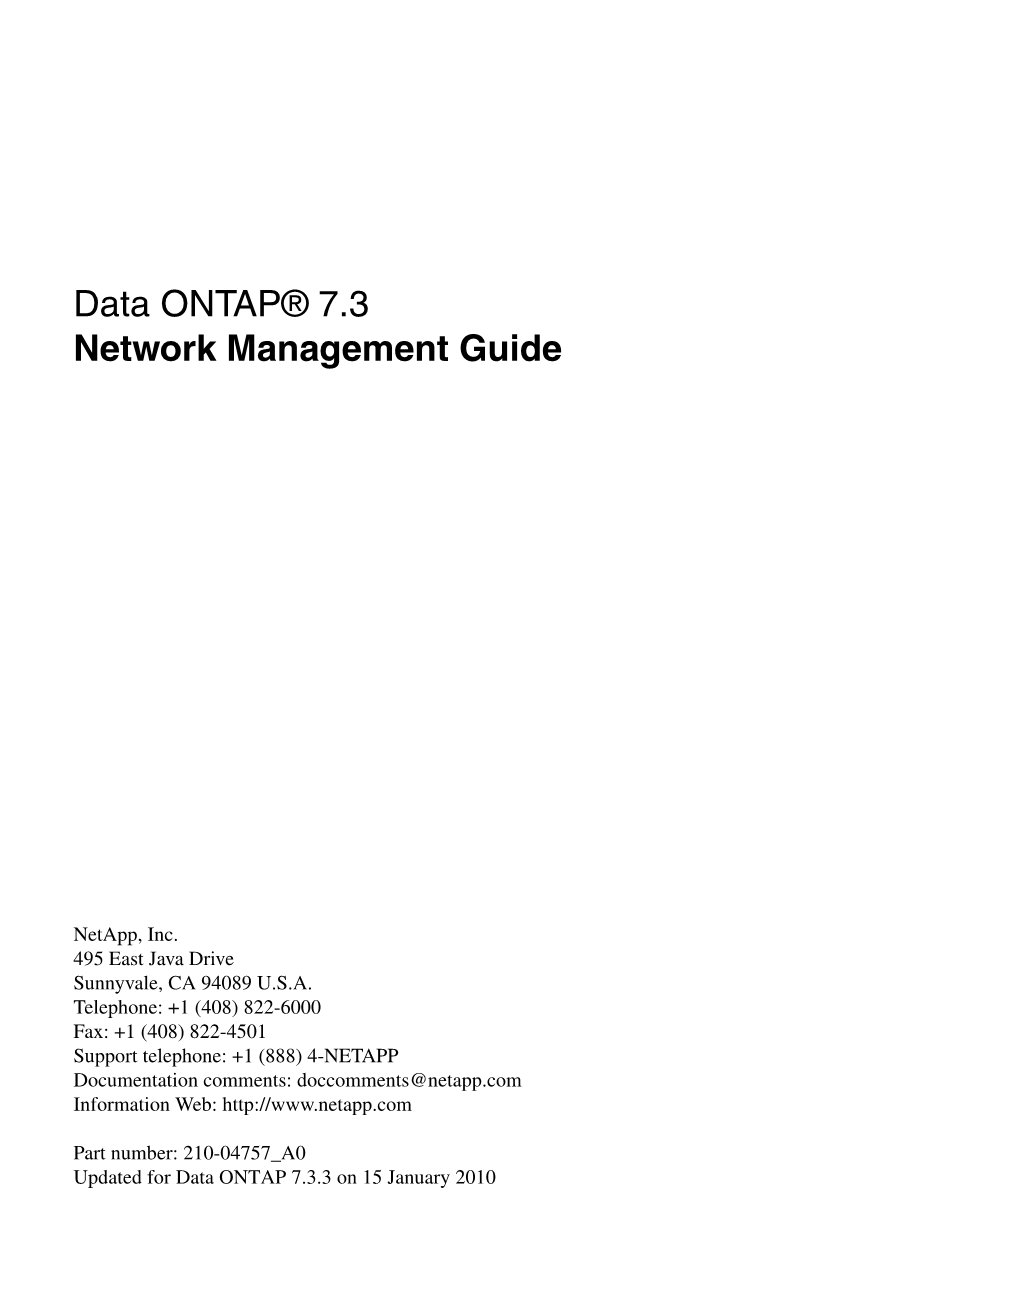 Data ONTAP 7.3 Network Management Guide